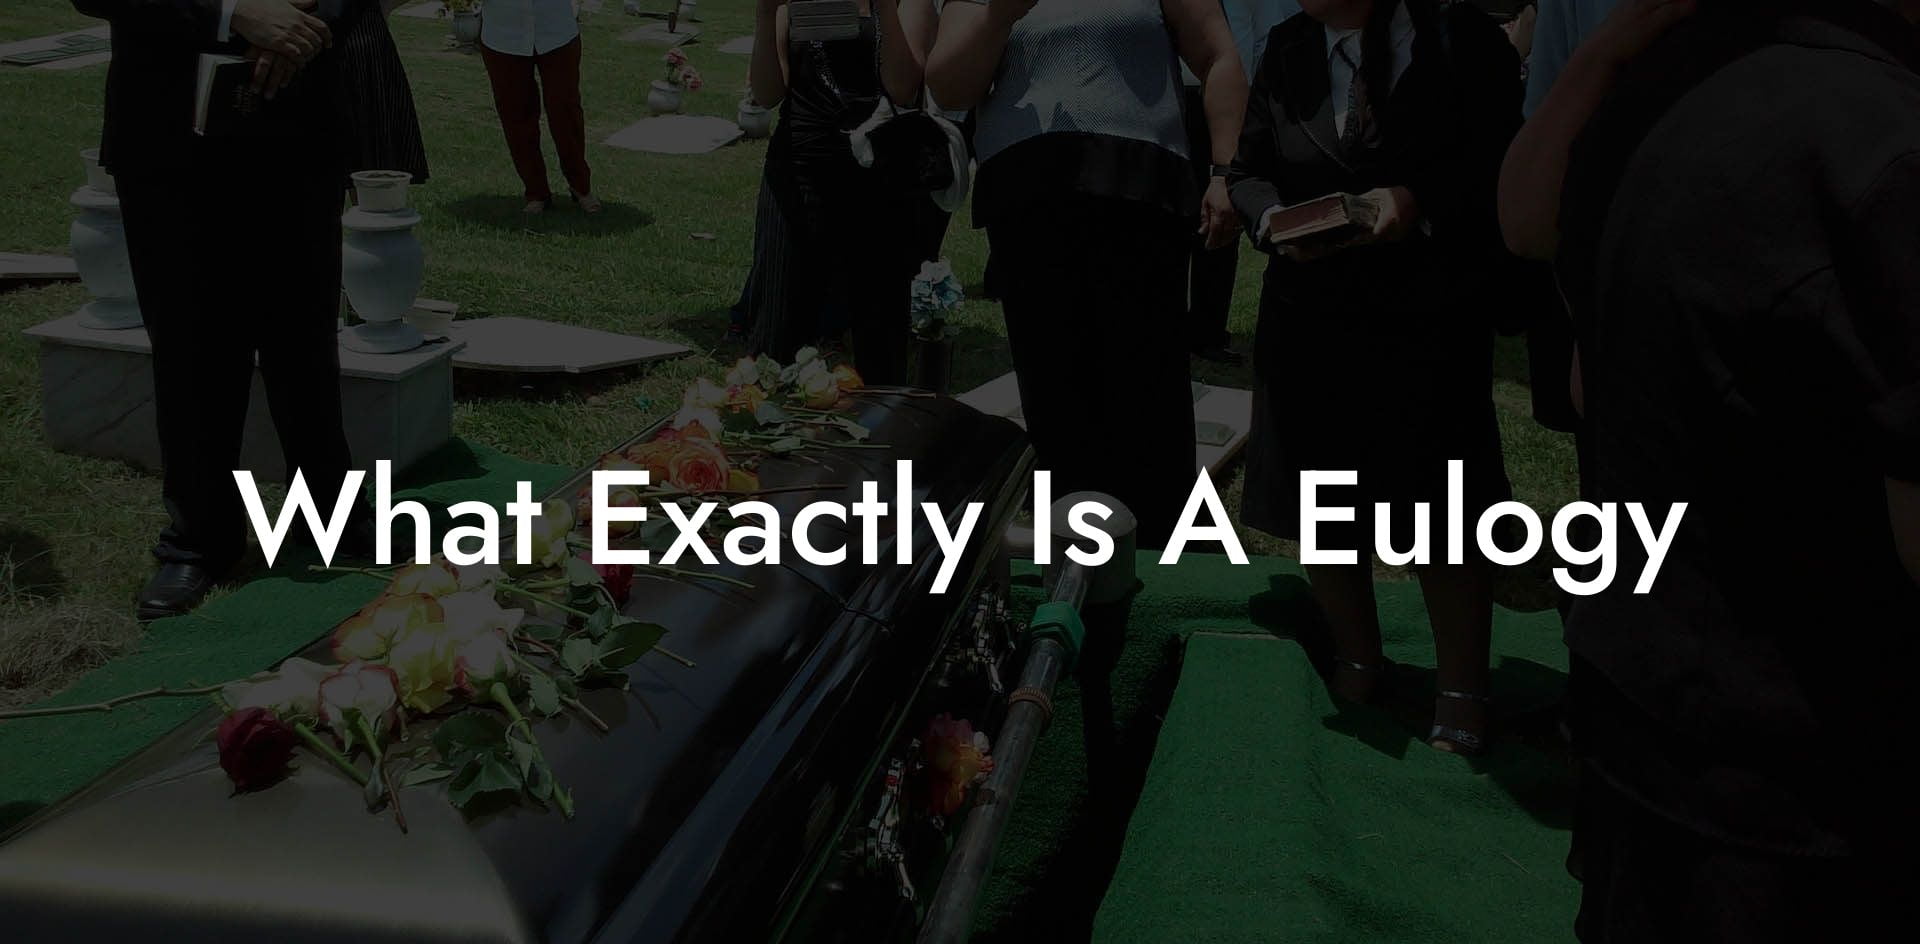 What Exactly Is A Eulogy?